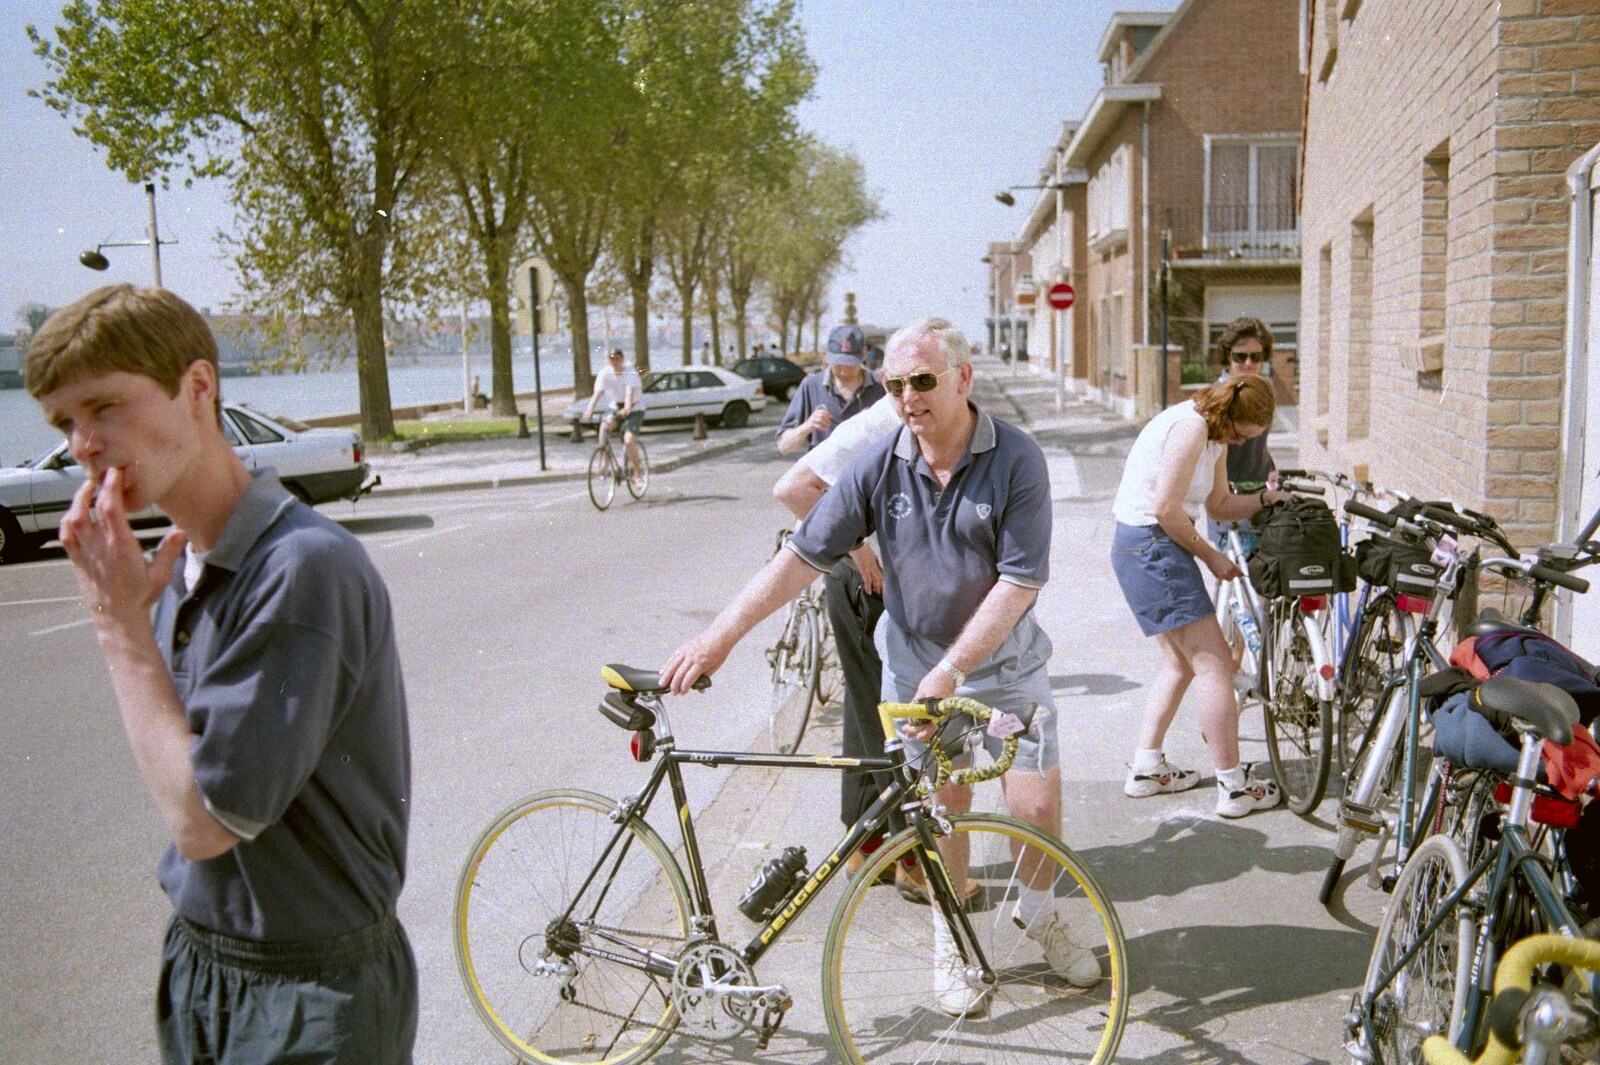 Colin hold on to DH's bike as Ninja M roams around from A BSCC Bike Ride to Gravelines, Pas de Calais, France - 11th May 2000